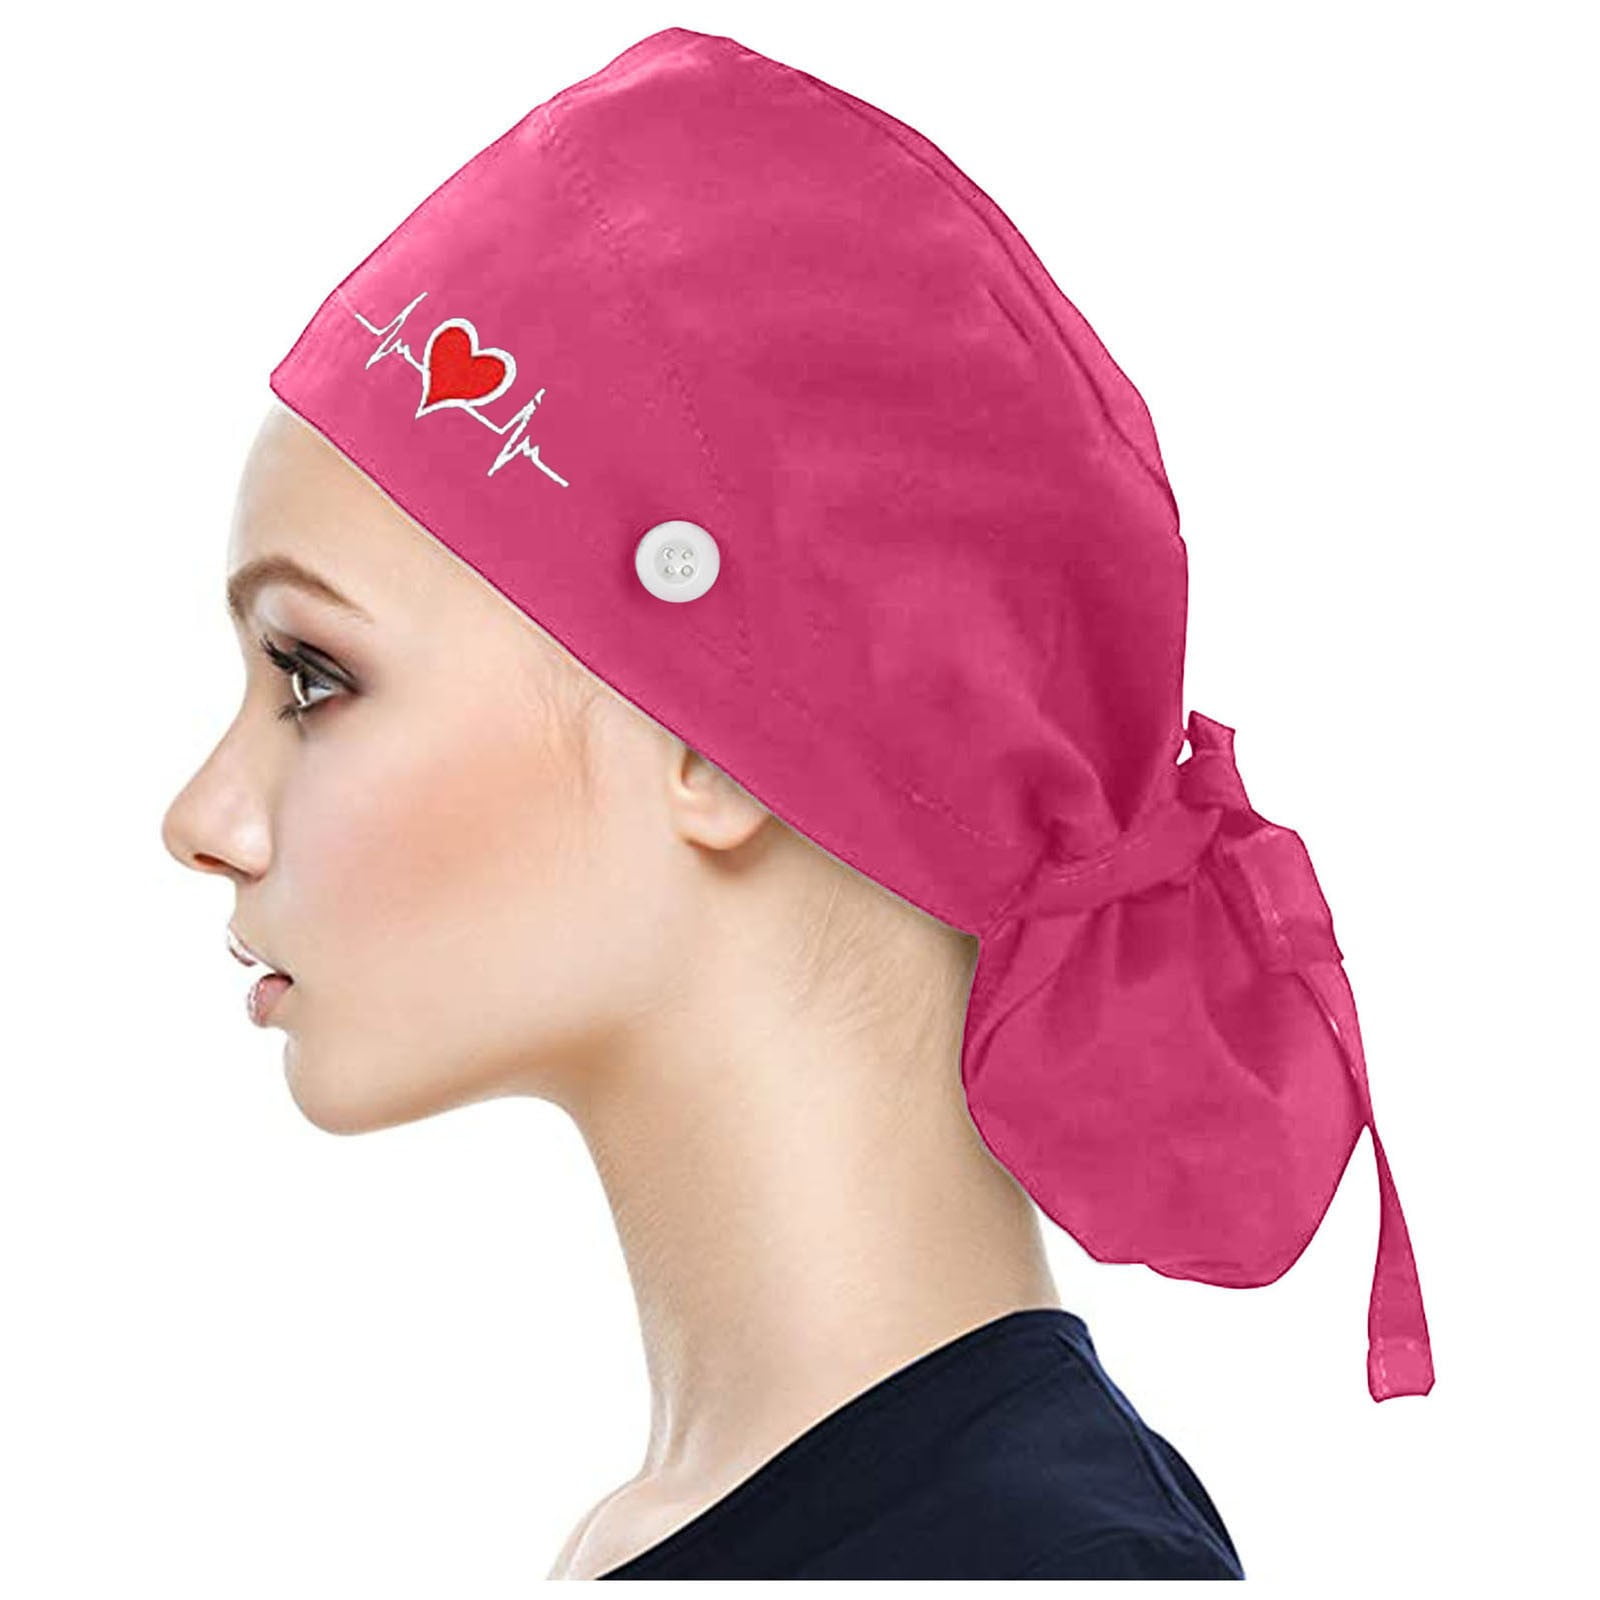 Homenesgenics Winter Hats with Ear Flap for Women Scrub Cap with Buttons Bouffant Hat with Sweatband for Womens and Mens Clearance, Women's, Size: One